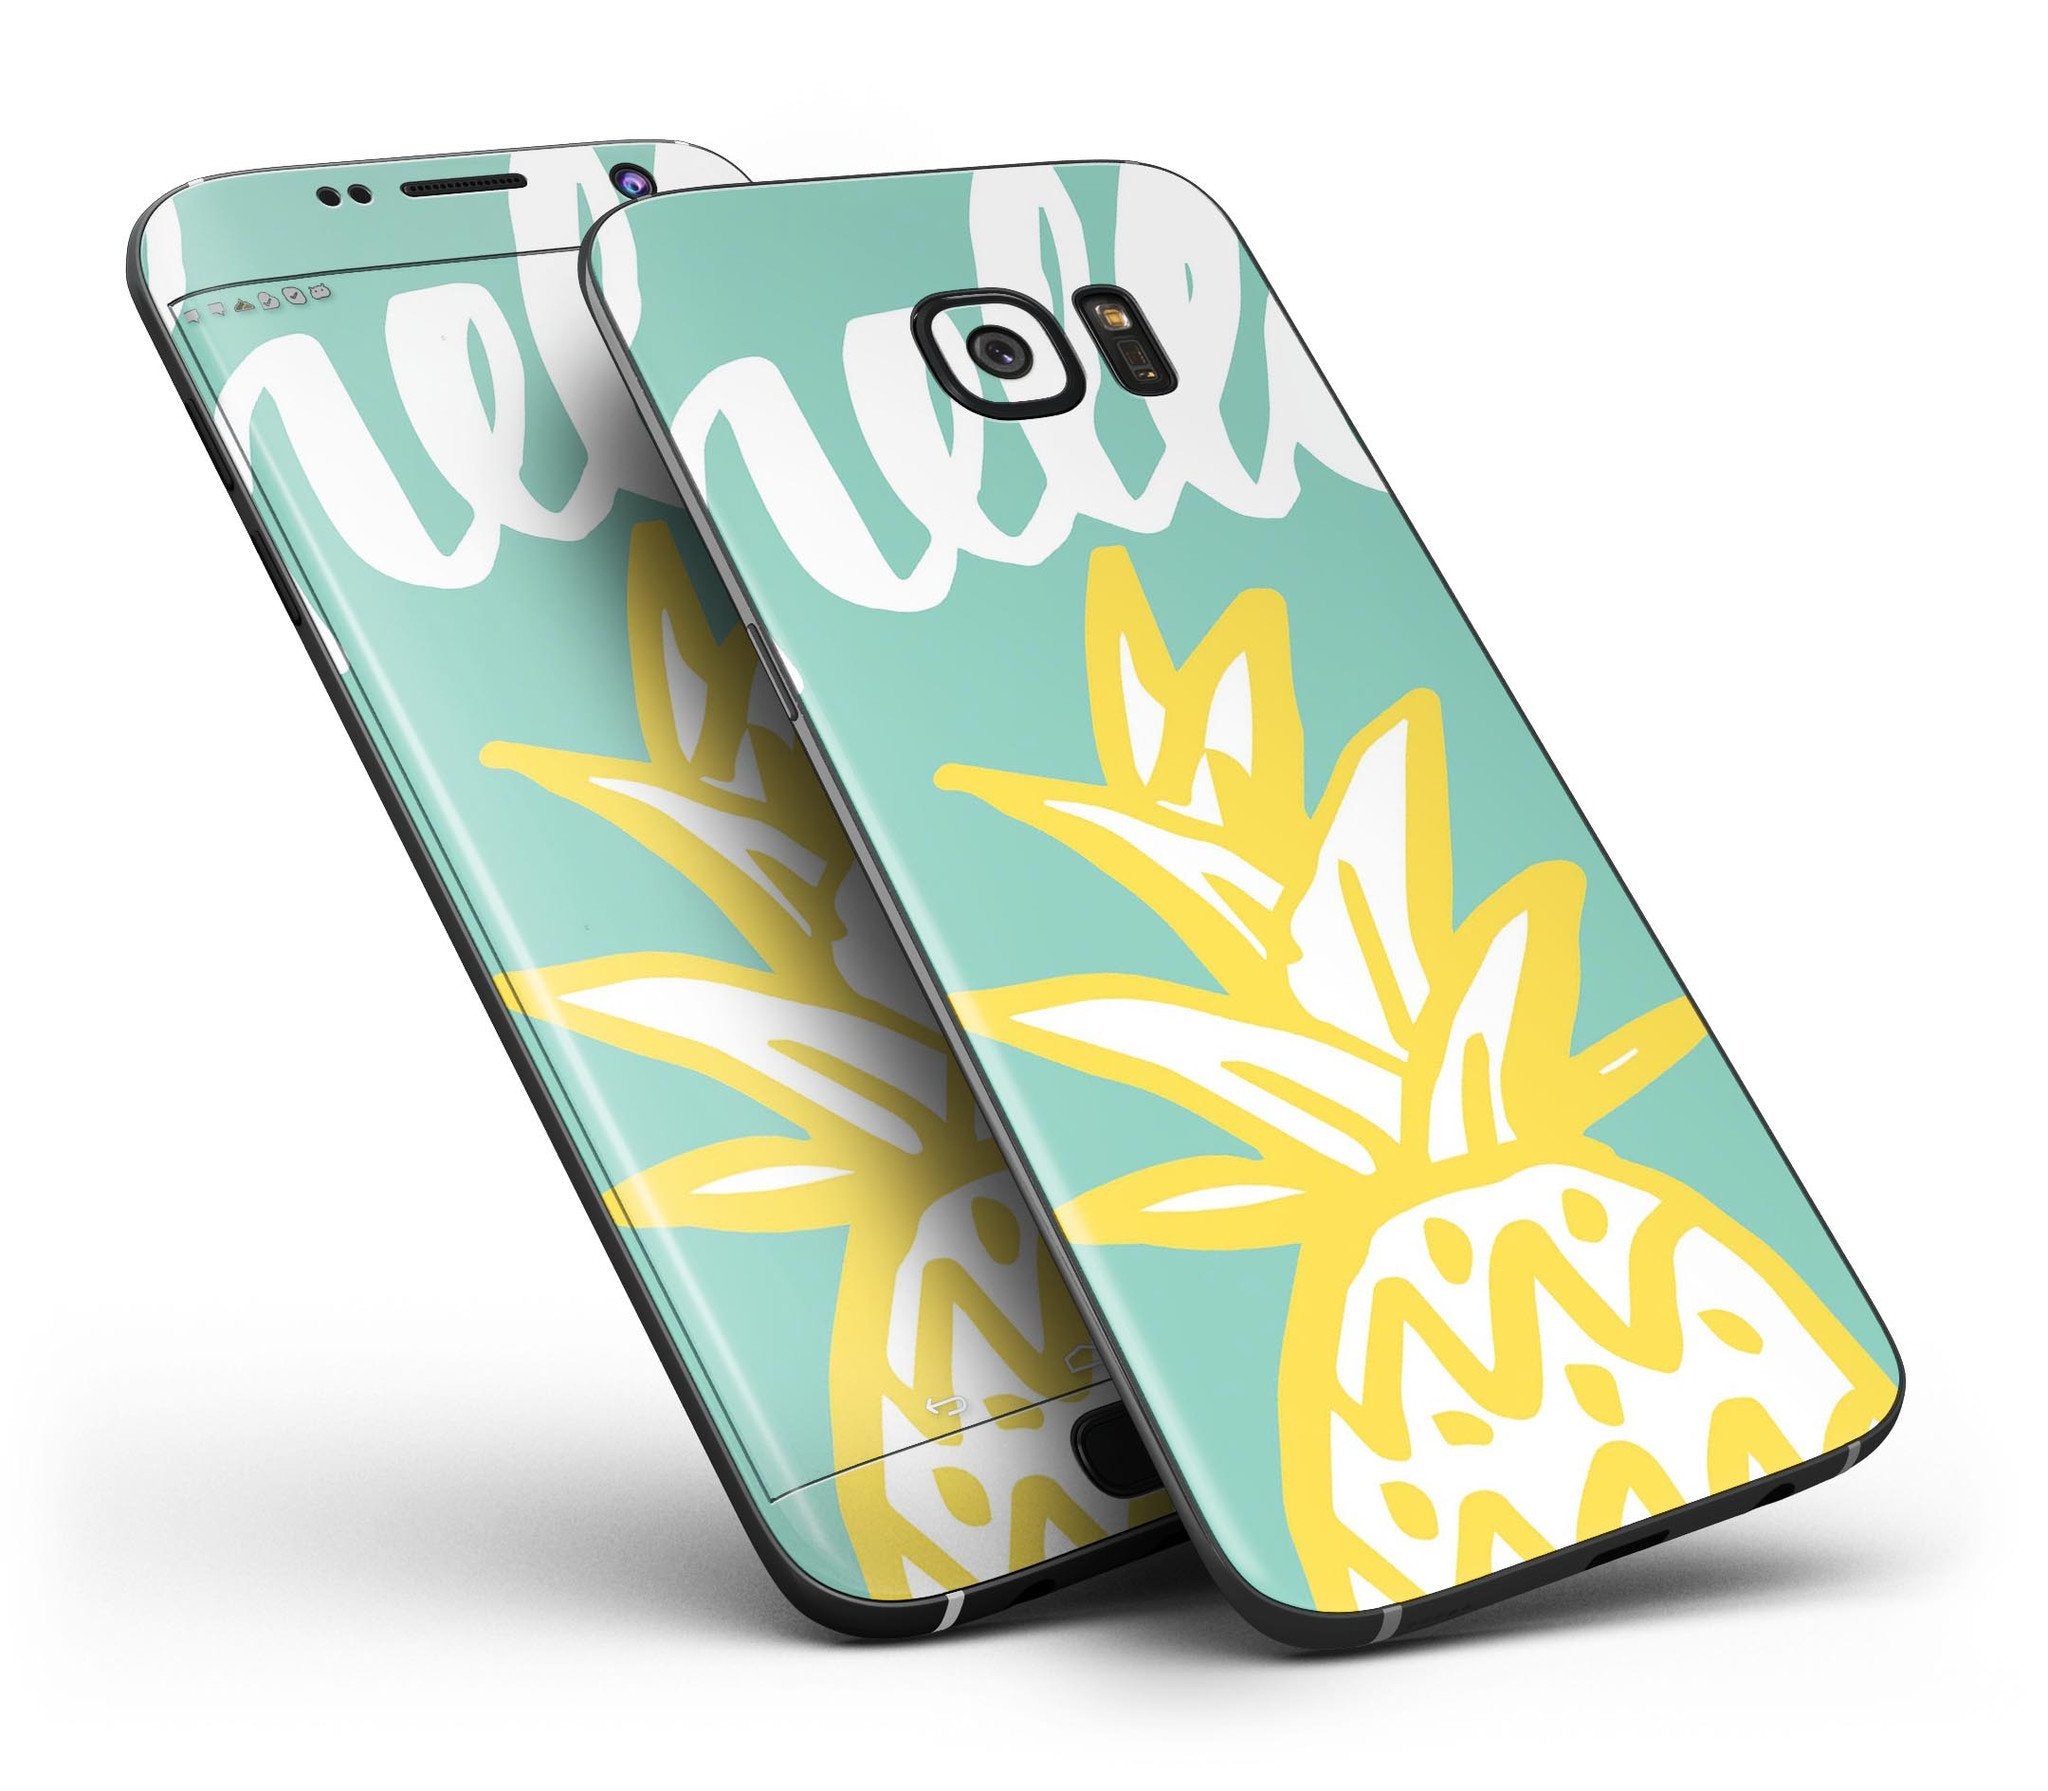 Well Hello Pineapple - Full Body Skin-Kit for the Samsung Galaxy S7 or